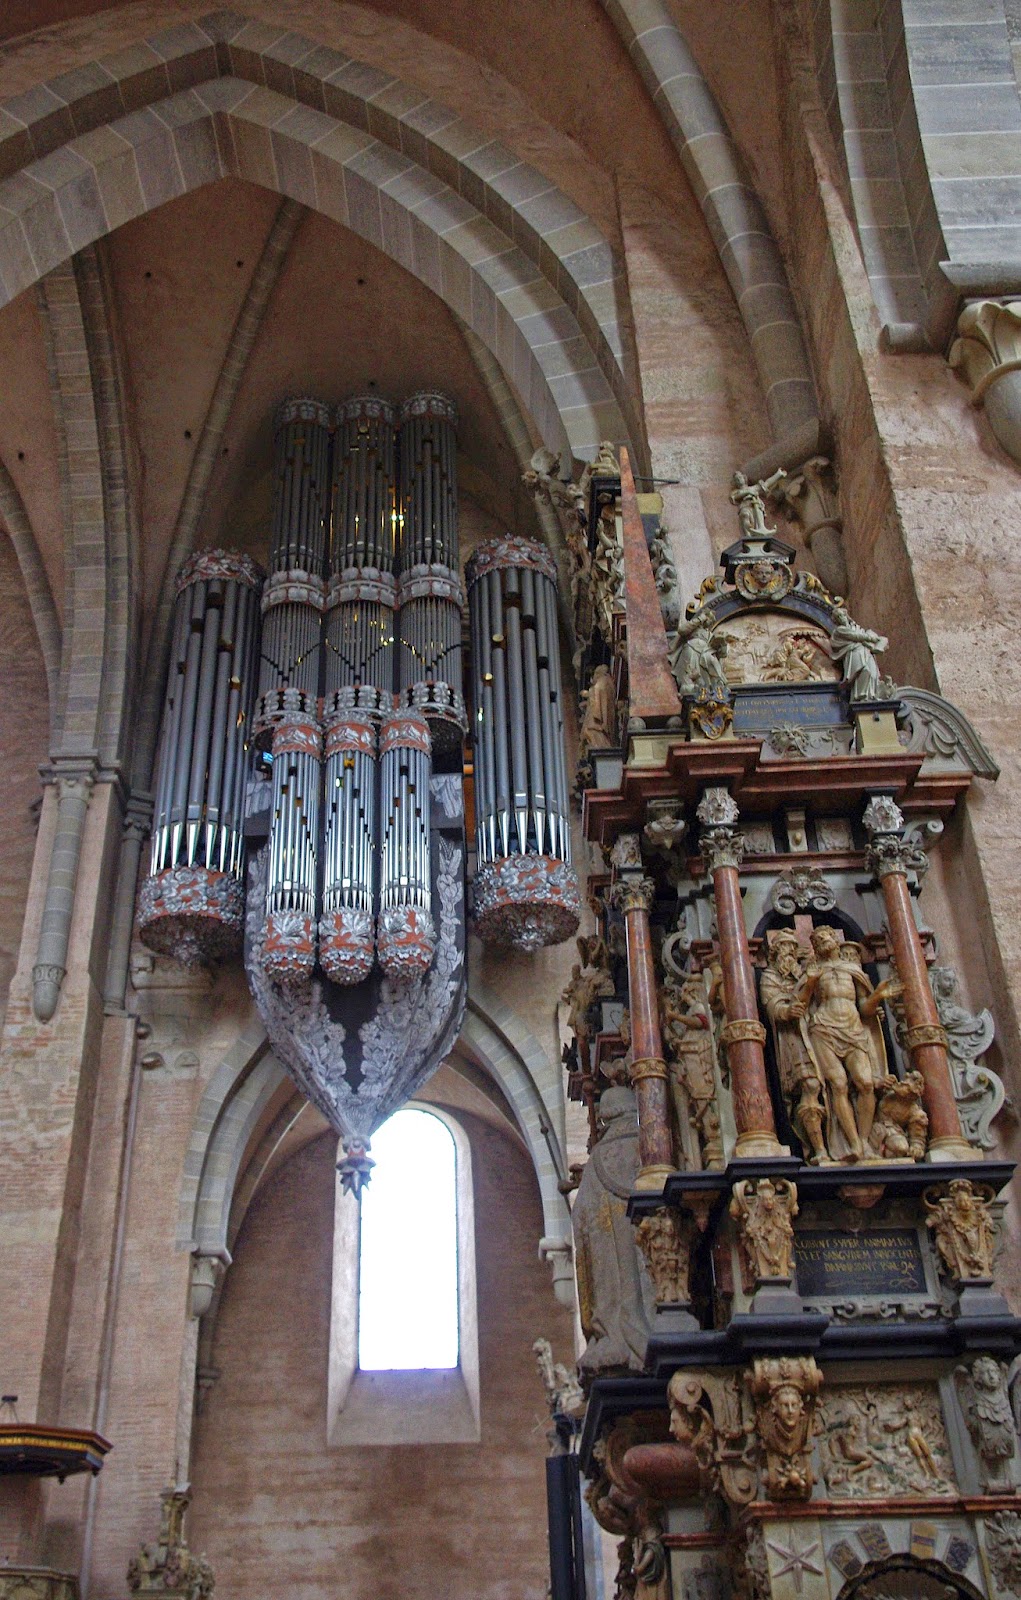 Altar With Pipe Organ In Background